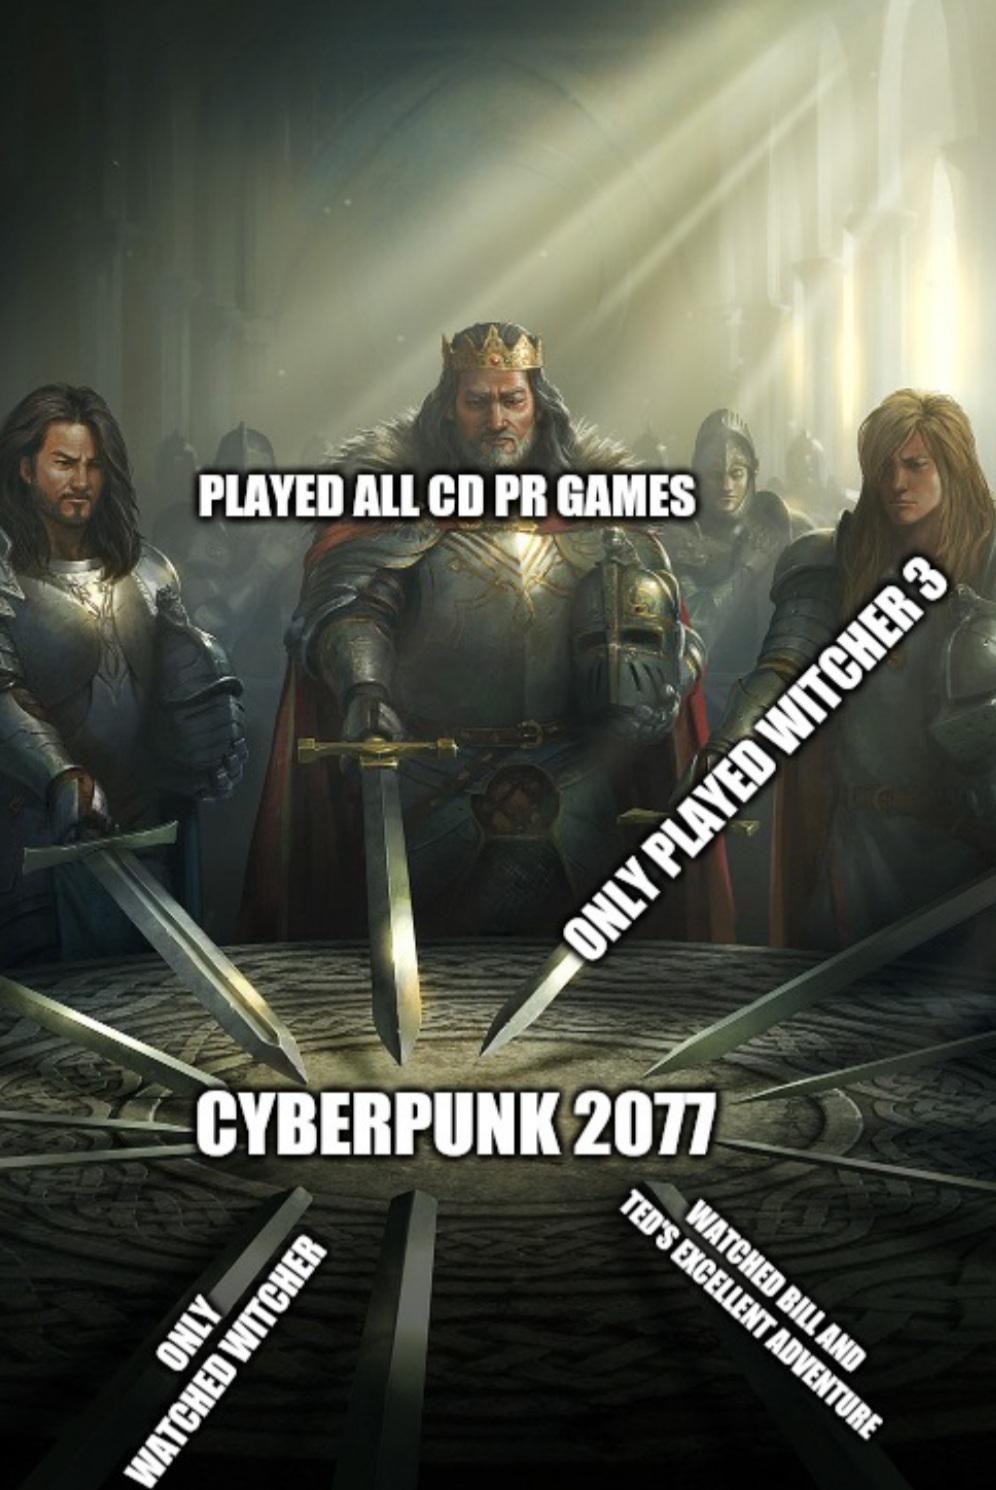 cyberpunk 2077 memes - Keanu Reeves - knights of the round table meme template - Played All Cd Pr Games Only Played Witcher 3 Cyberpunk 2077 Watched Bill And Ted'S Excellent Adventure Only Watched Witcher